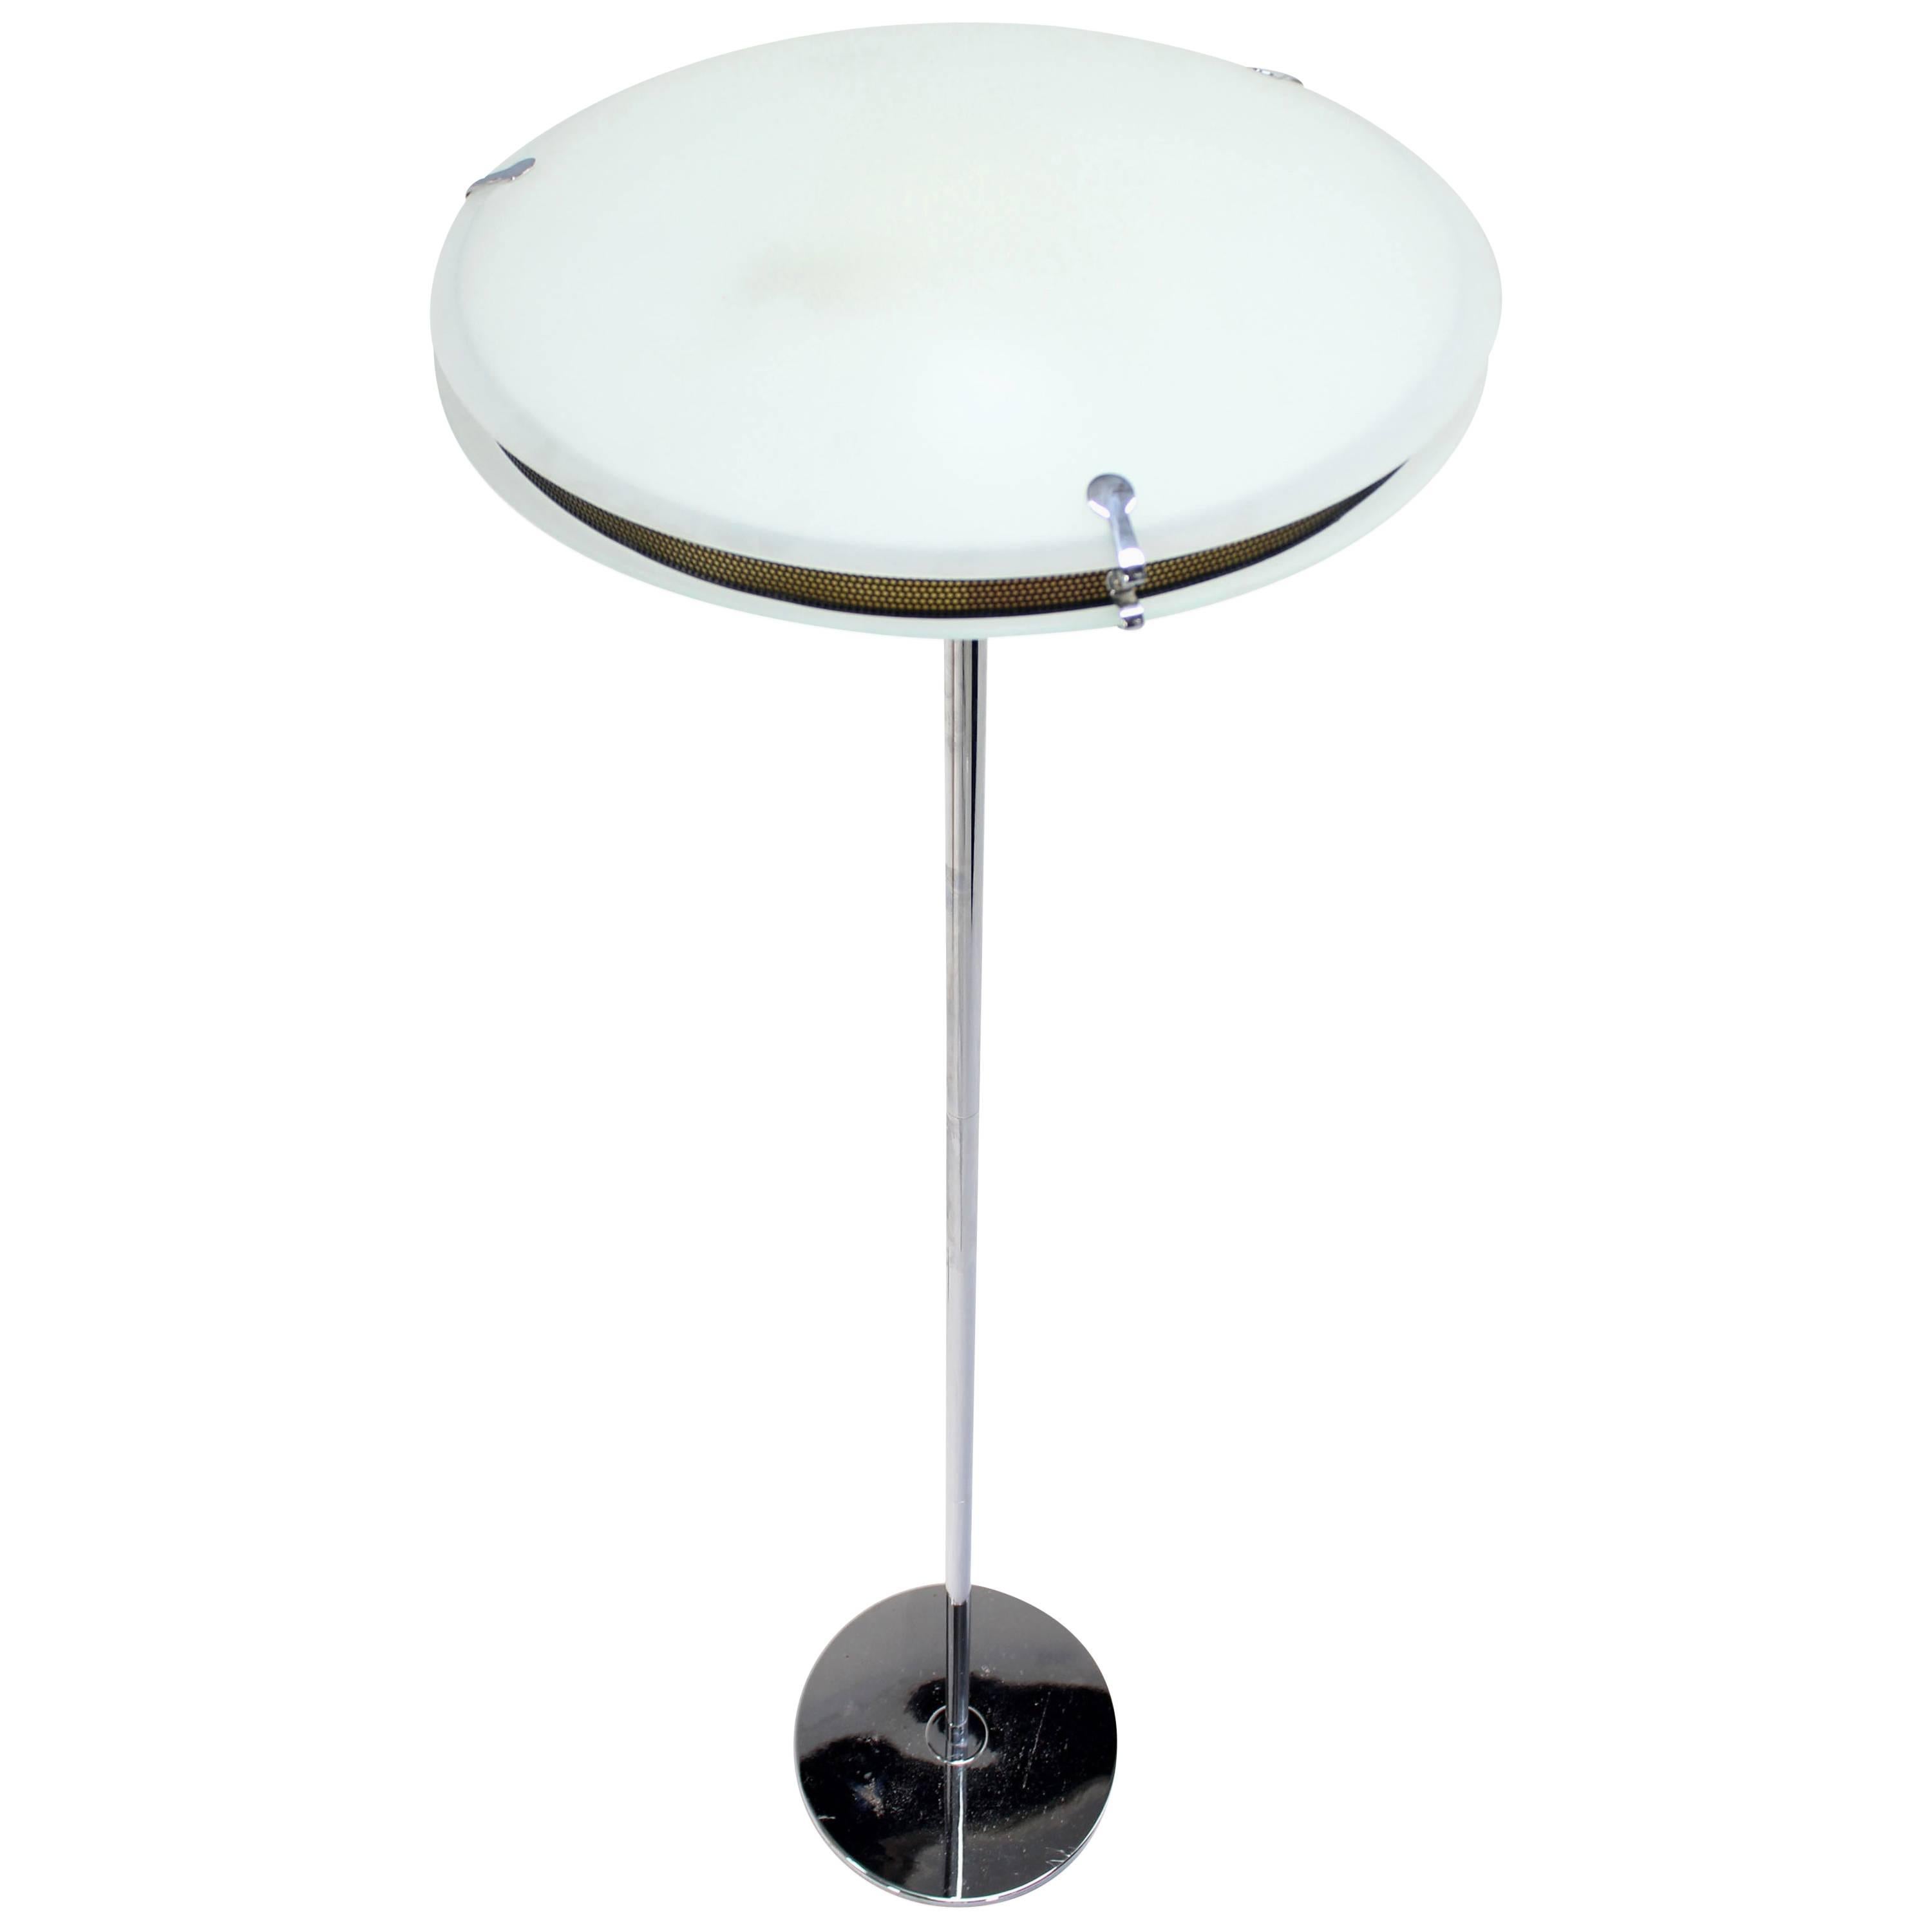 Chrome Saucer Shape Shade Top Frosted Glass Floor Lamp   For Sale